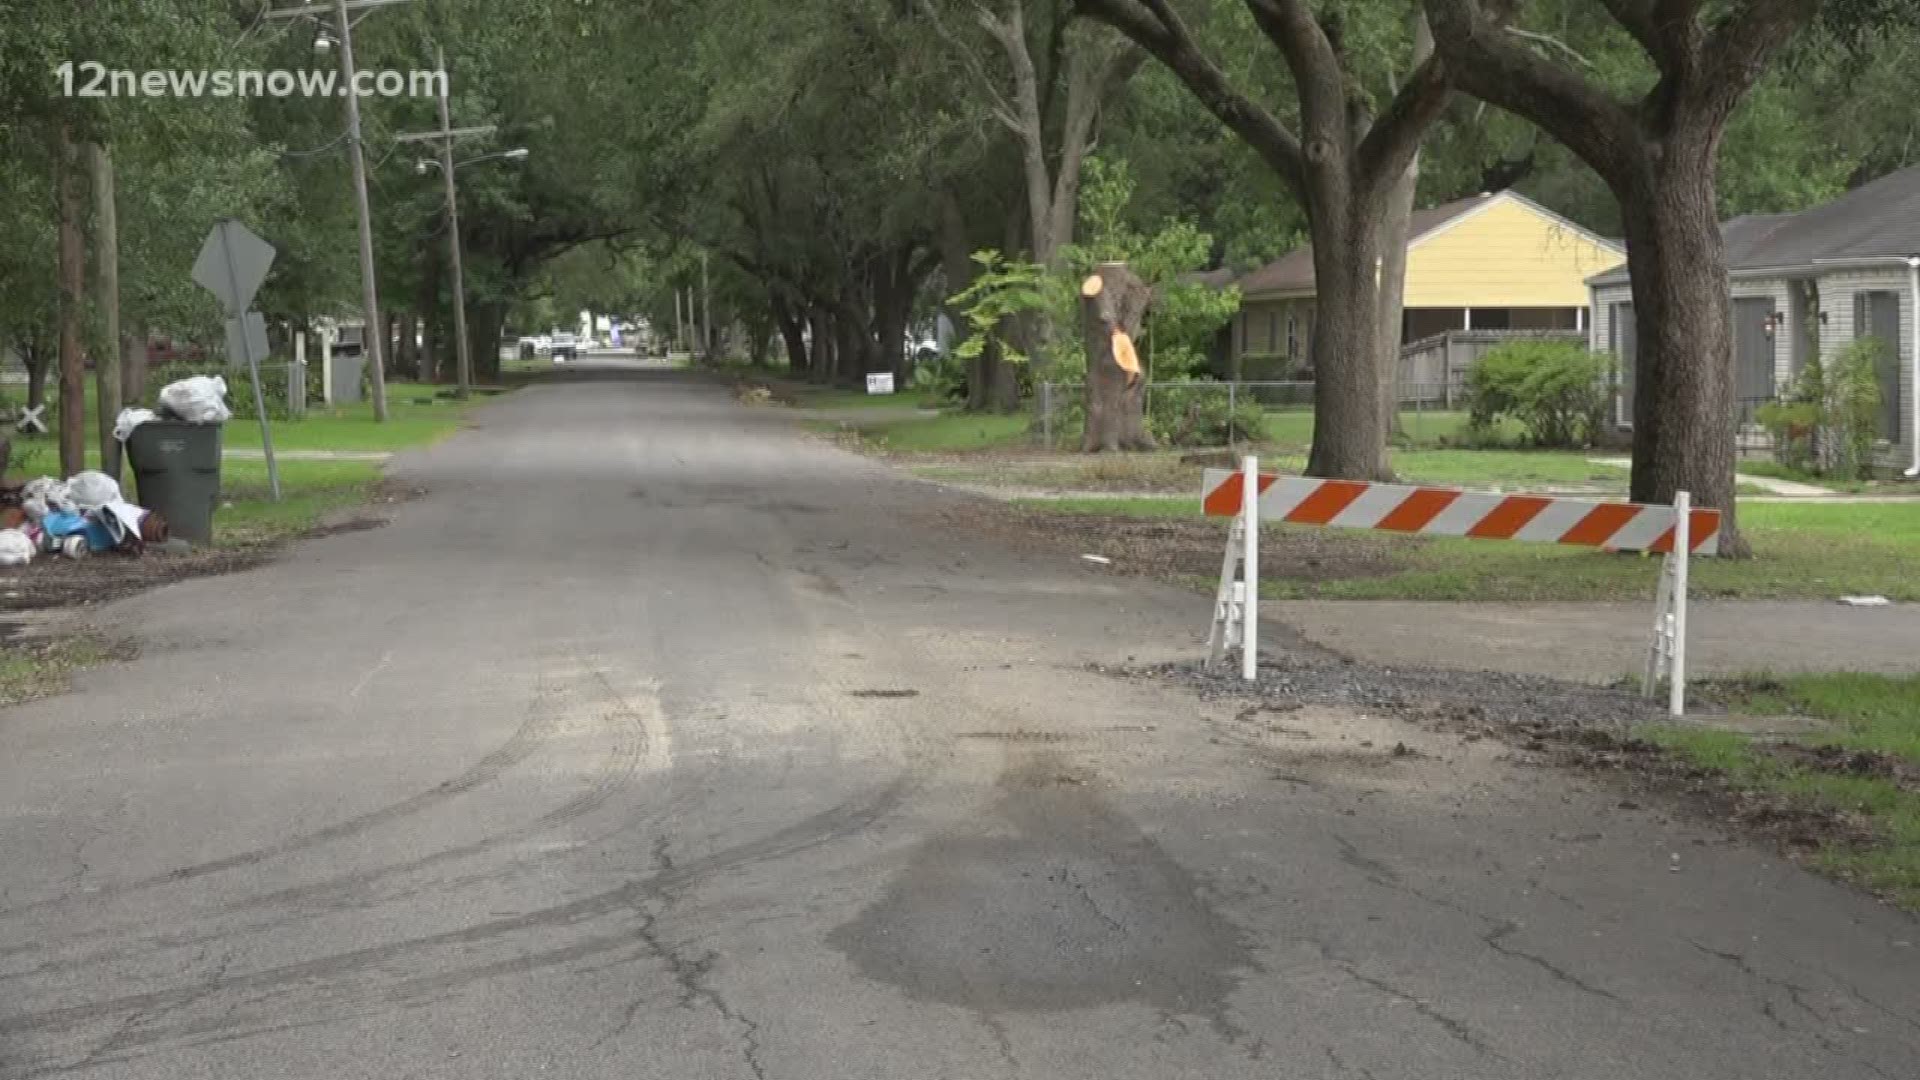 Some residents admitted it feels like they've been dealing with potholes for an eternity.